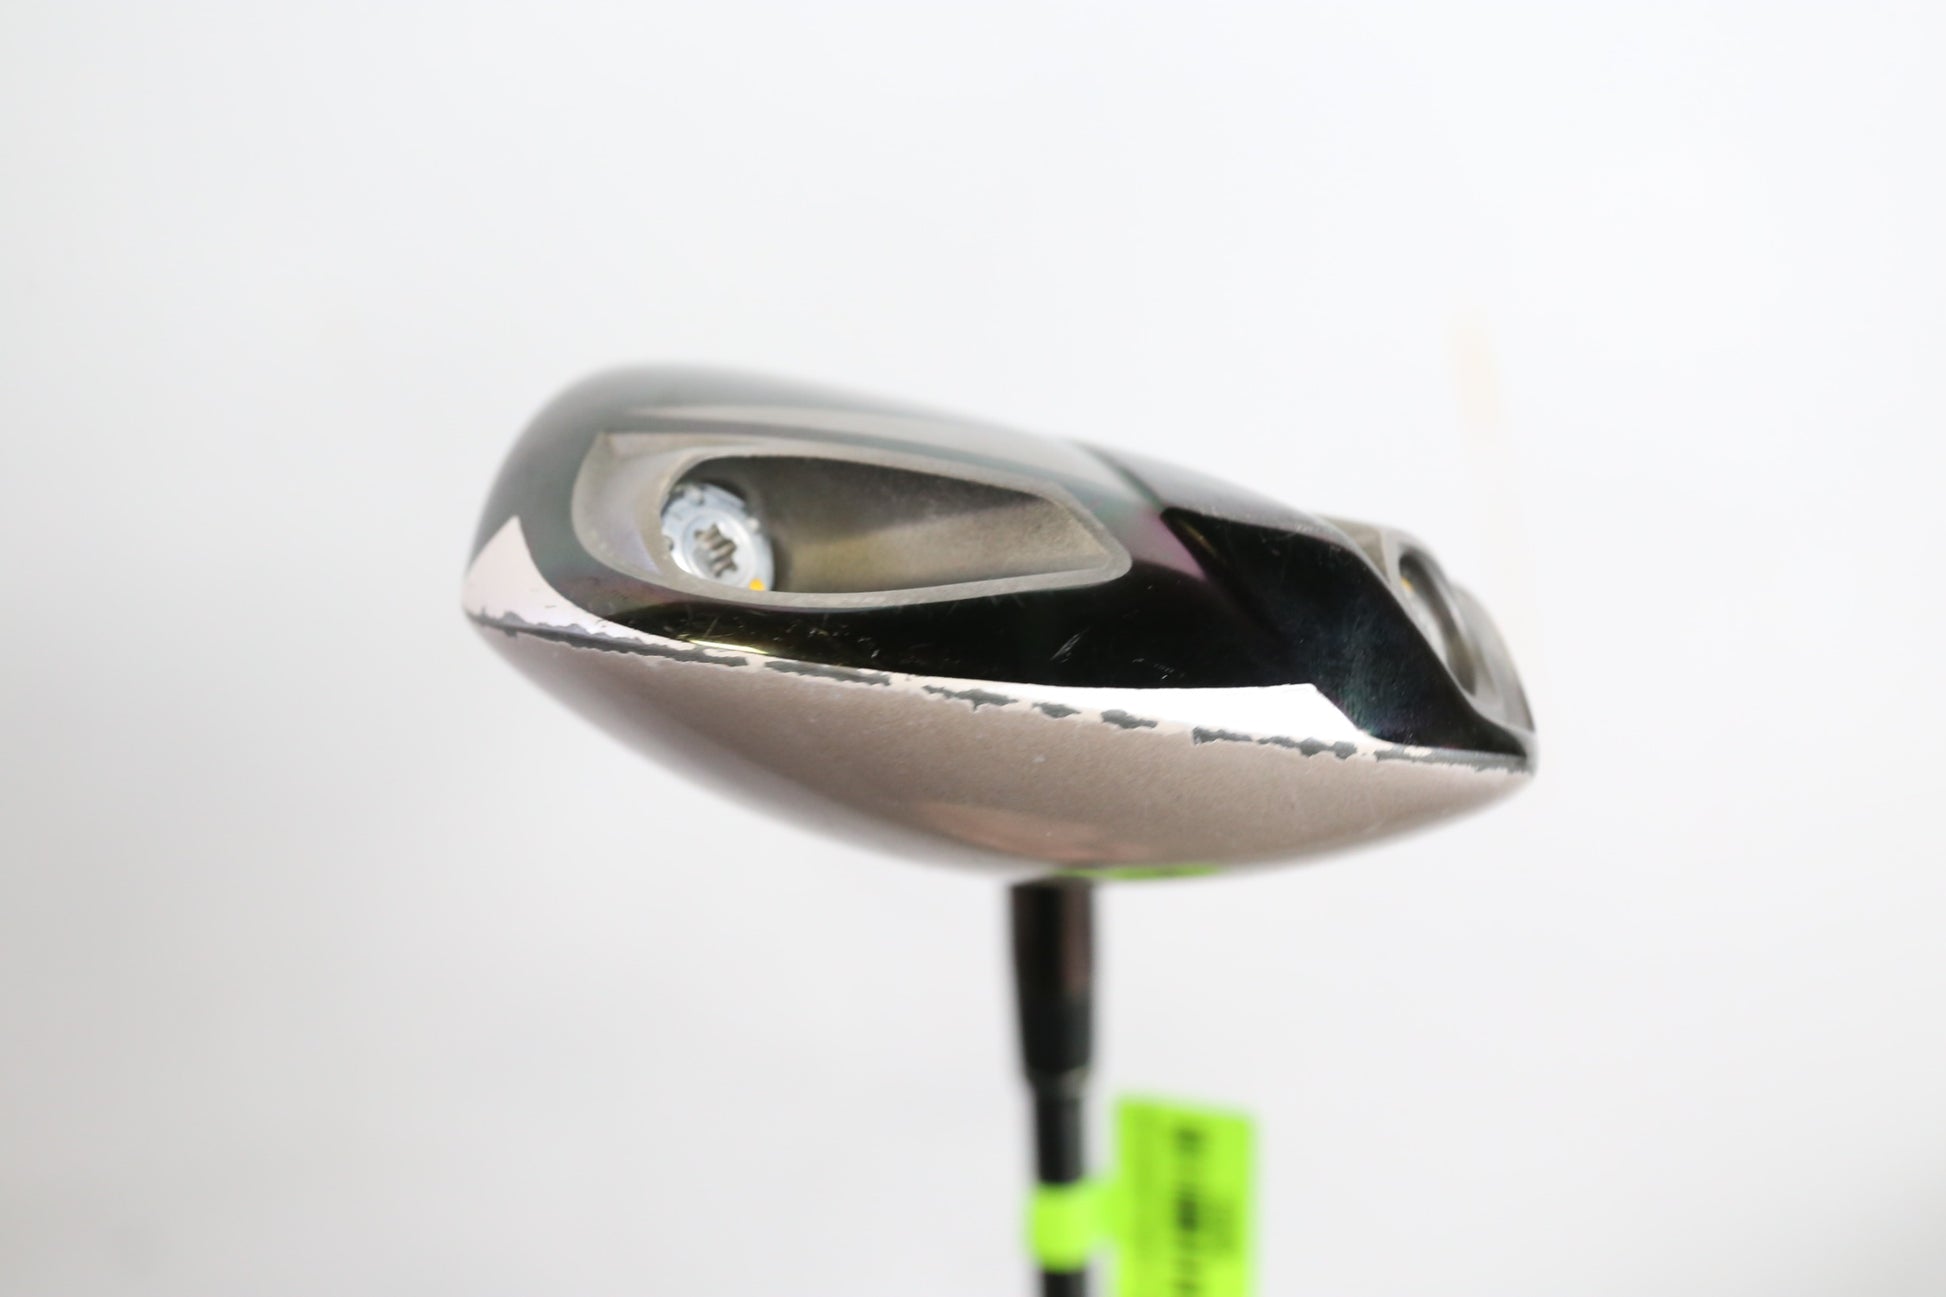 Used TaylorMade r7 CGB MAX 5-Wood - Right-Handed - 18 Degrees - Ladies Flex-Next Round